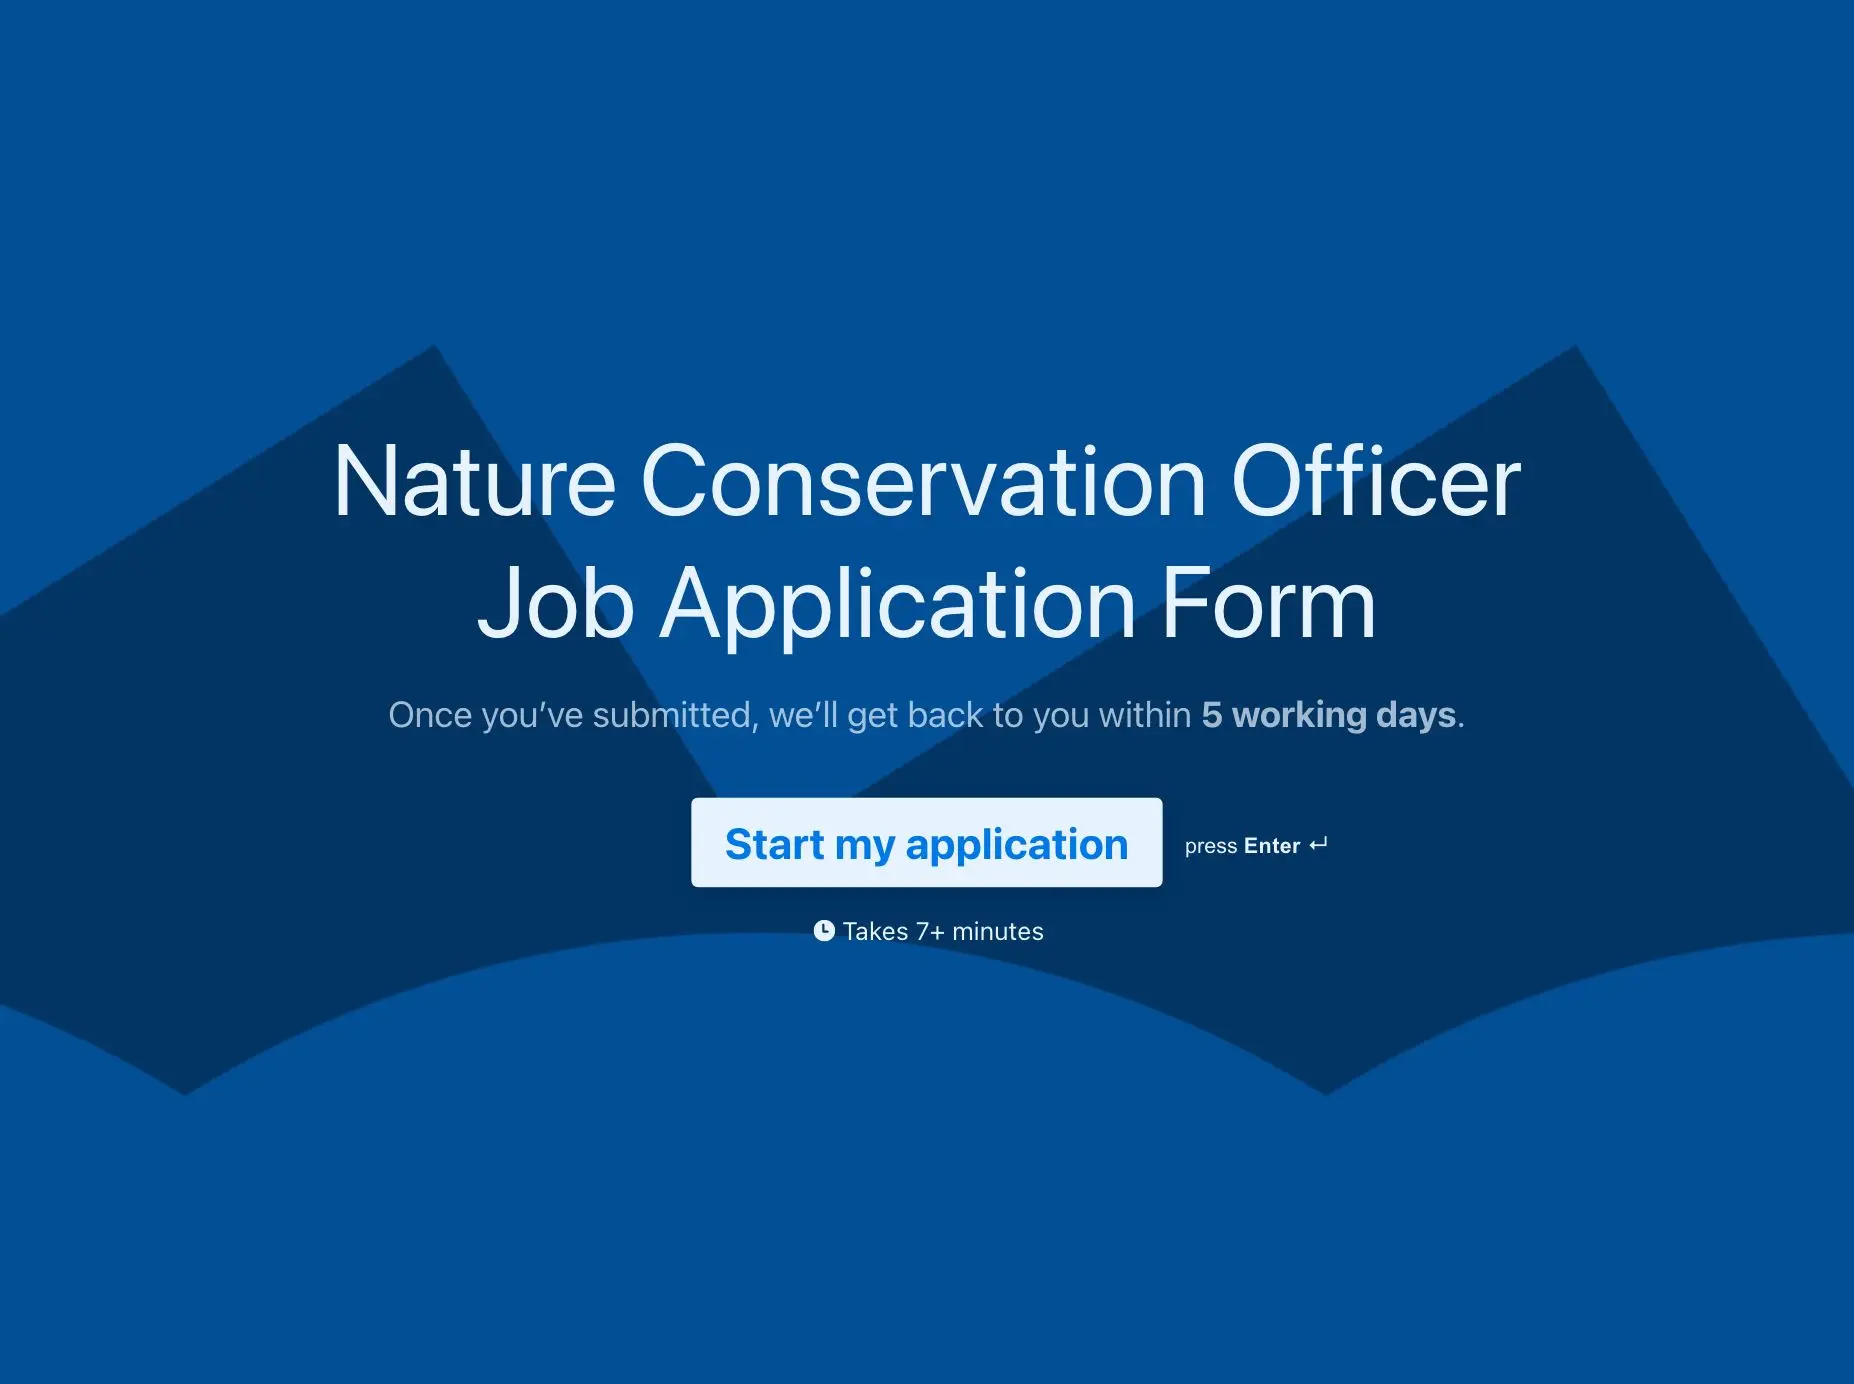 Nature Conservation Officer Job Application Form Template Hero